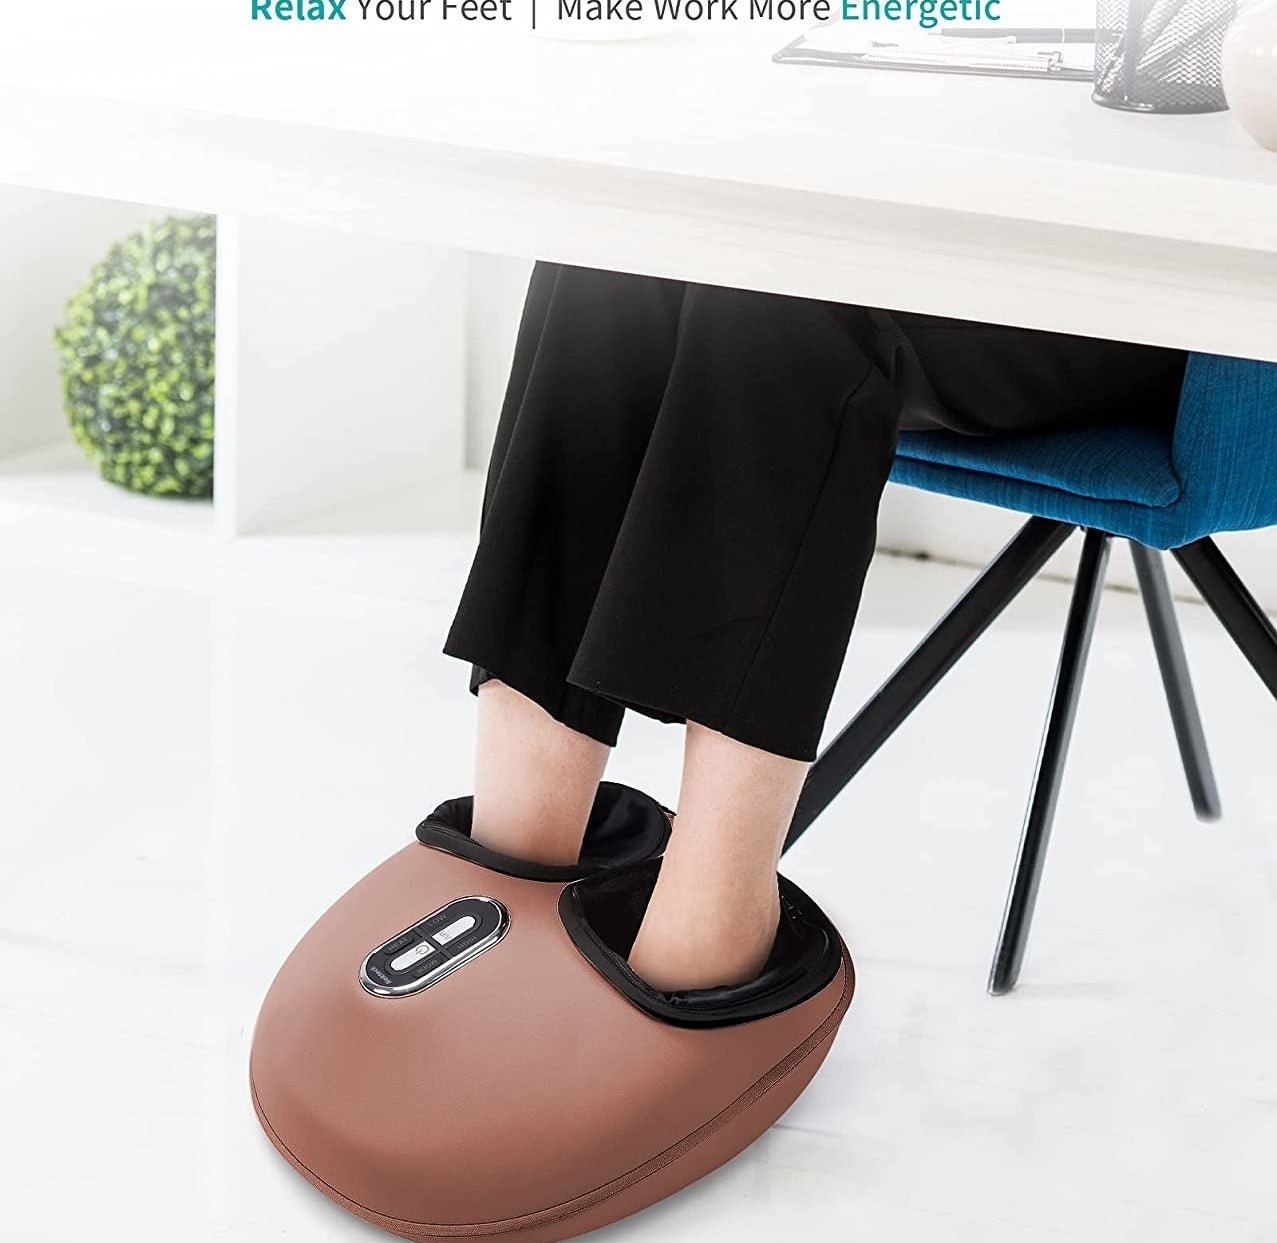 A person with their feet in an electronic foot massager